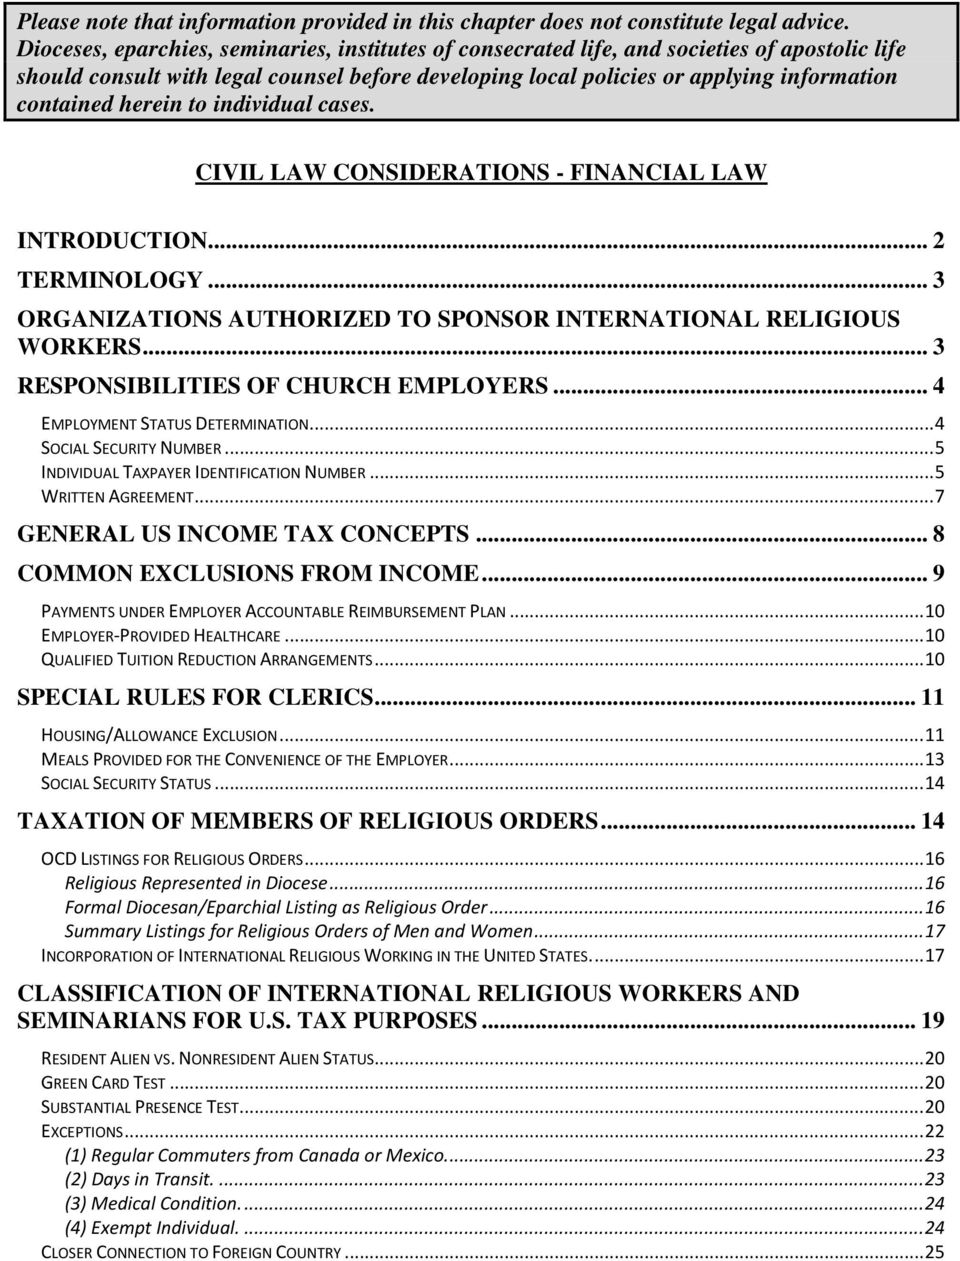 herein to individual cases. CIVIL LAW CONSIDERATIONS - FINANCIAL LAW INTRODUCTION... 2 TERMINOLOGY... 3 ORGANIZATIONS AUTHORIZED TO SPONSOR INTERNATIONAL RELIGIOUS WORKERS.